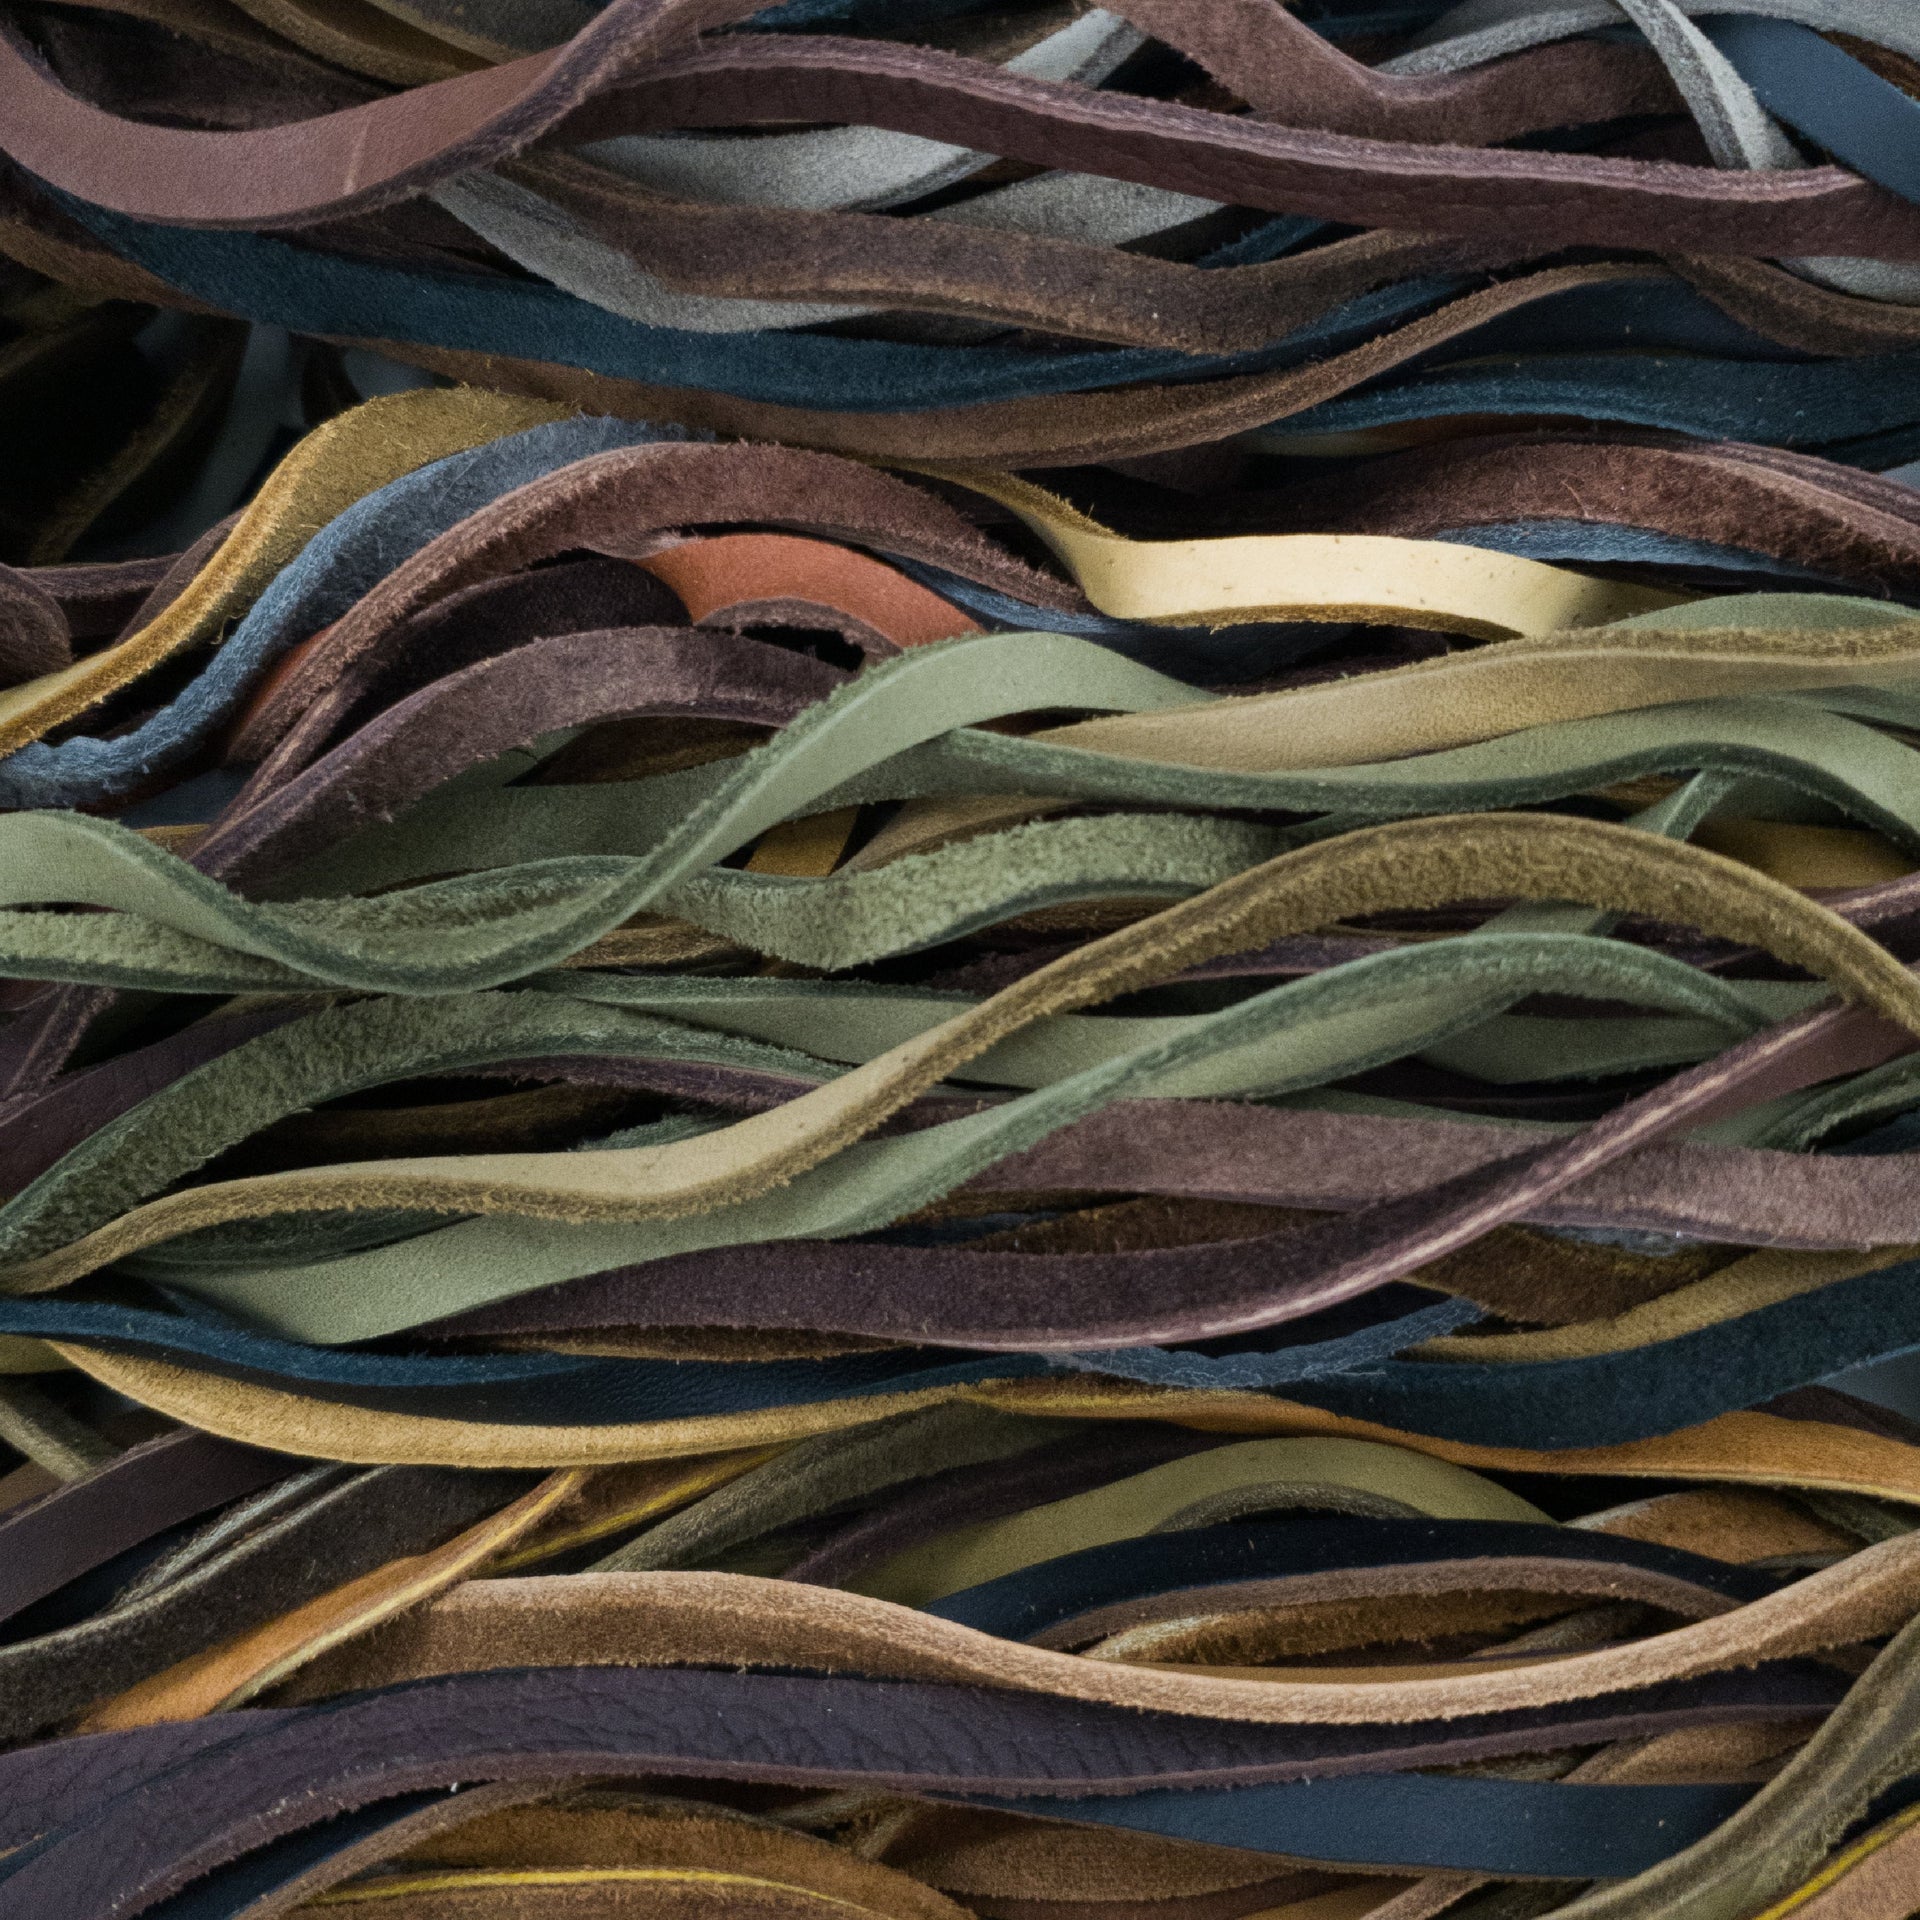 Earth Toned, Crafter's Oil Tanned Lace Bundles, 25 Laces, 72" x 1/4",  | The Leather Guy